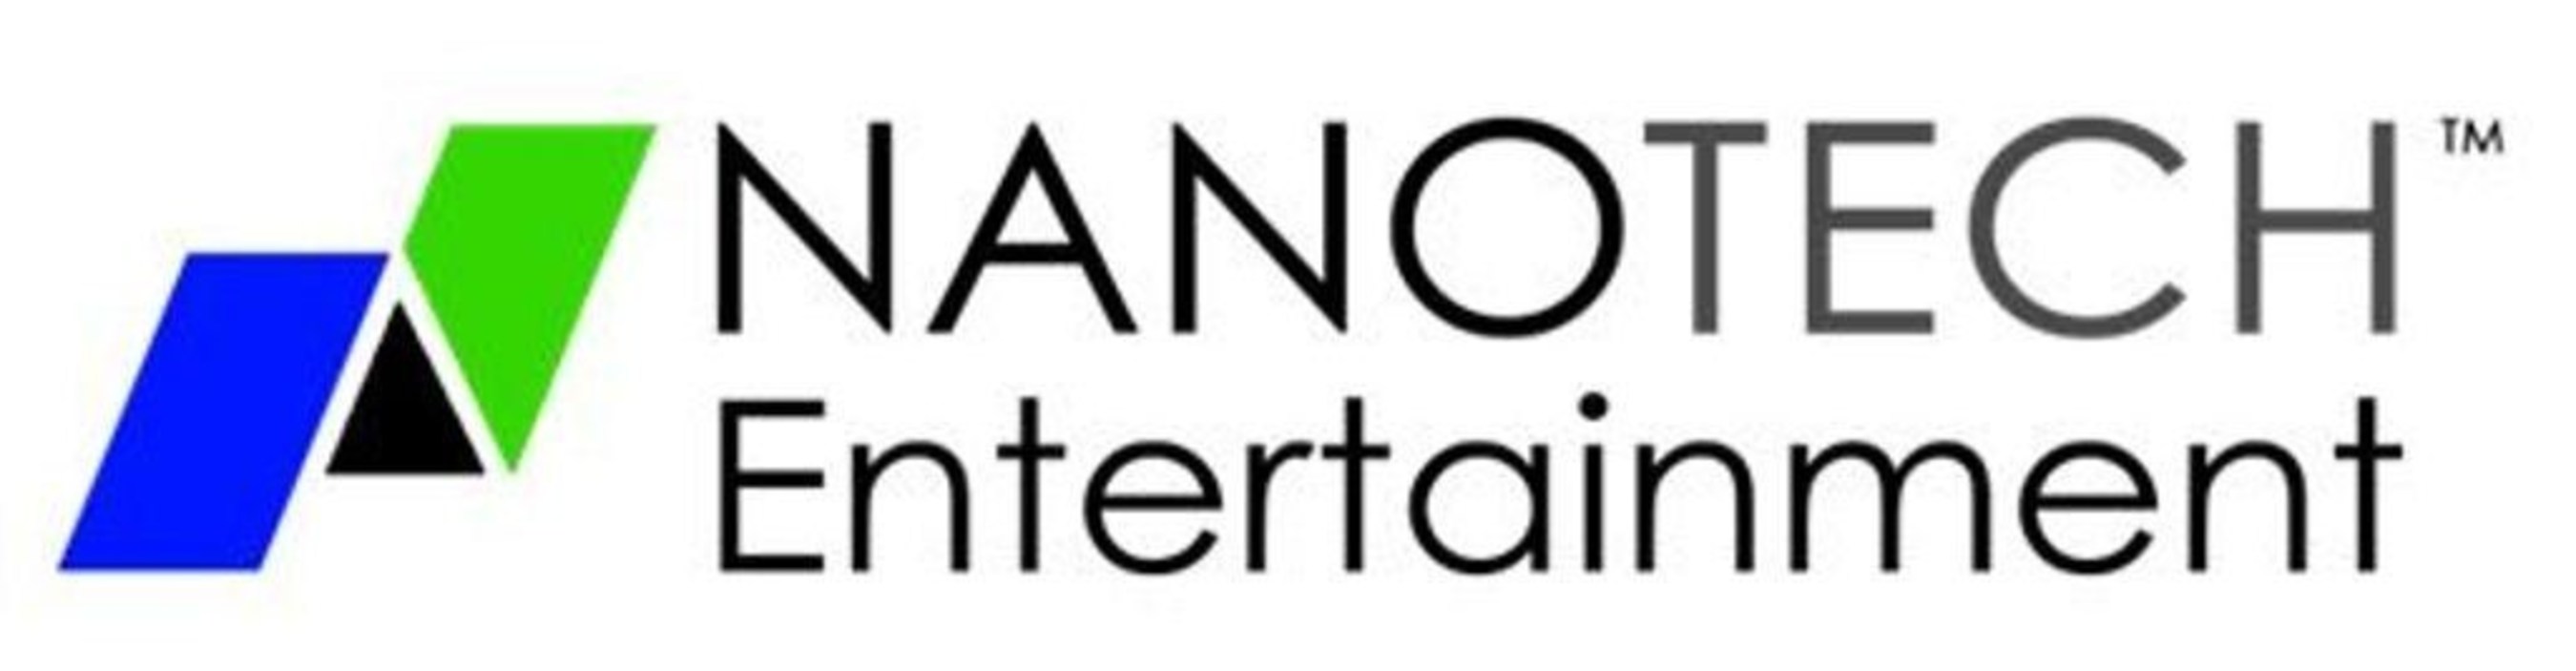 NanoTech Entertainment (NTEK), a pioneer in bringing the 4K Ultra HD experience to consumers, NanoTech Entertainment is a conglomerate of entertainment companies focused on leveraging technology to deliver state of the art entertainment and communications products. Headquartered in San Jose, CA, NanoTech Entertainment is a technology company that focuses on all aspects of the entertainment industry. With six technology business units, focusing on 3D, Gaming, Media & IPTV, Mobile Apps, and...